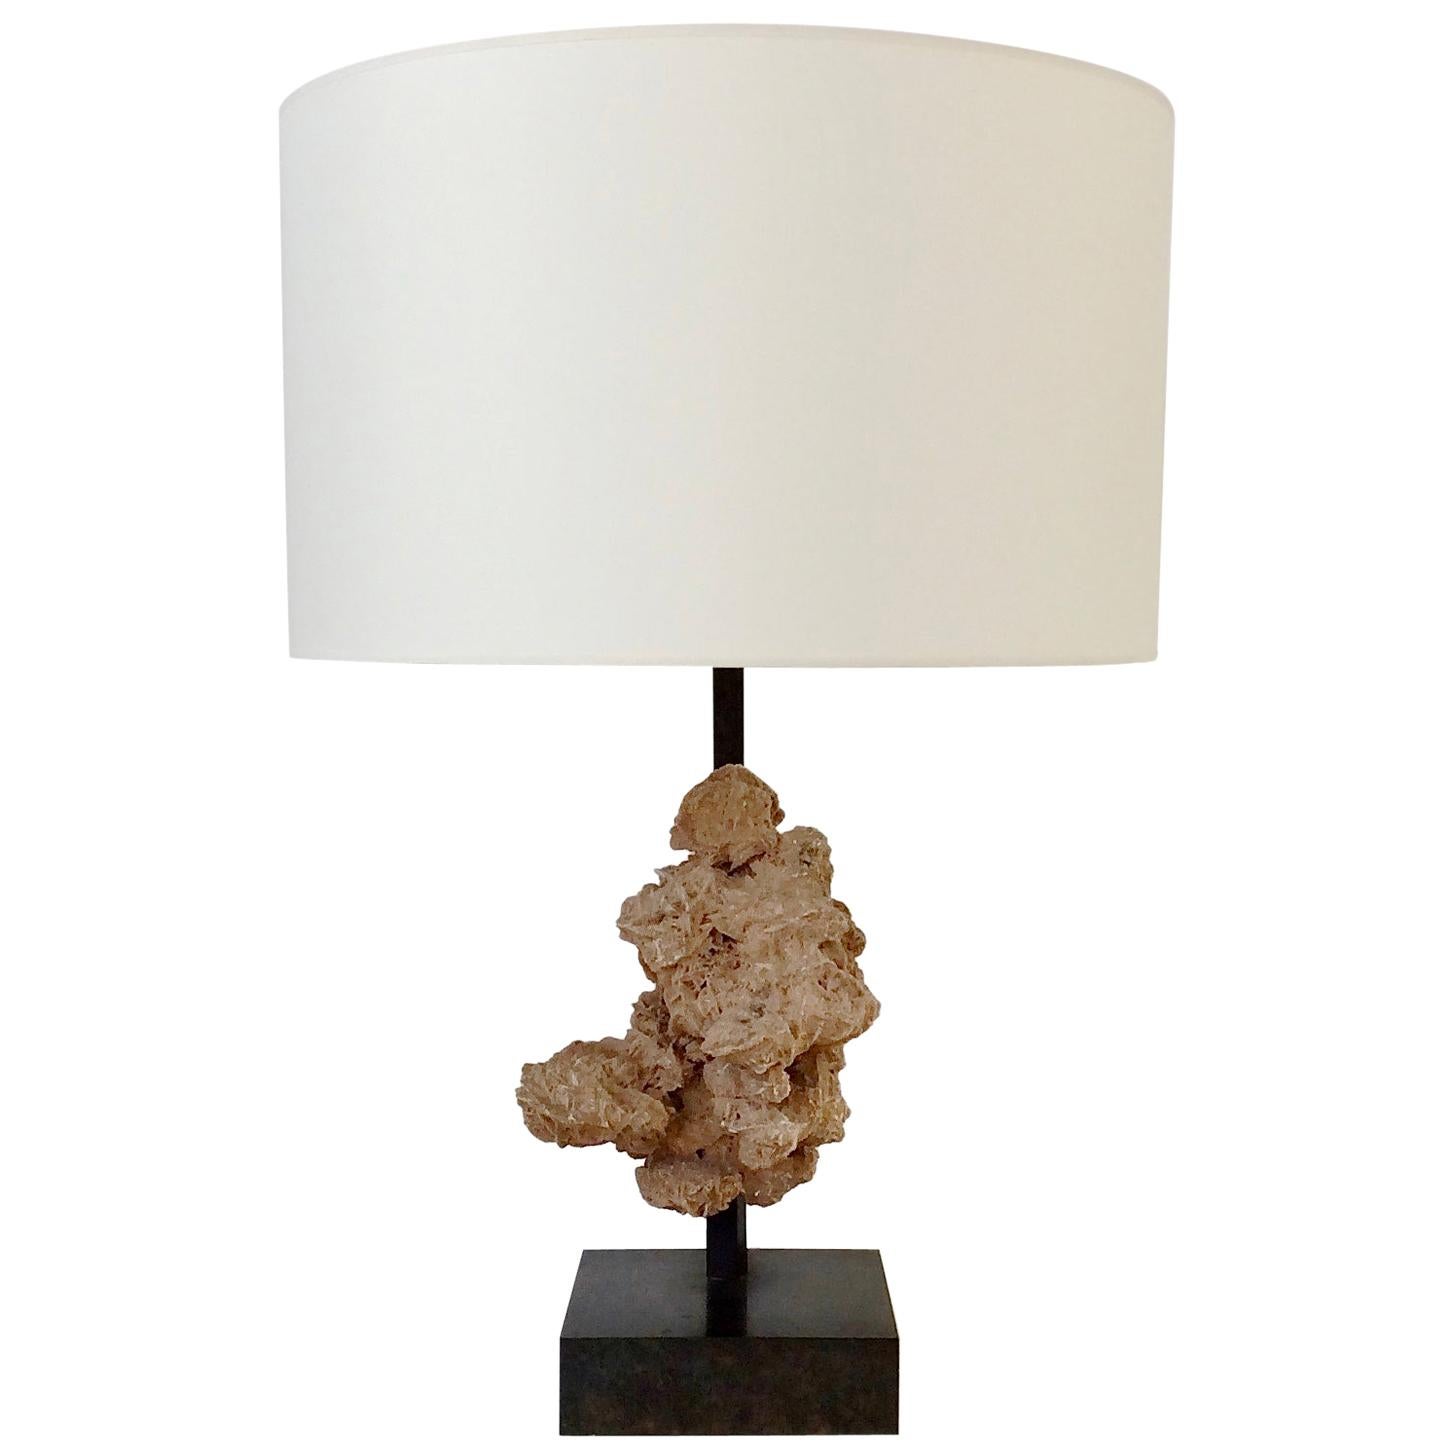 Elegant table lamp, circa 1970, Belgium.
Desert rose, patinated metal, new ivory fabric shade.
One E27 bulb 
Dimensions: 72 cm H, 50 cm W, 50 cm D.
All purchases are covered by our Buyer Protection Guarantee.
This item can be returned within 7 days